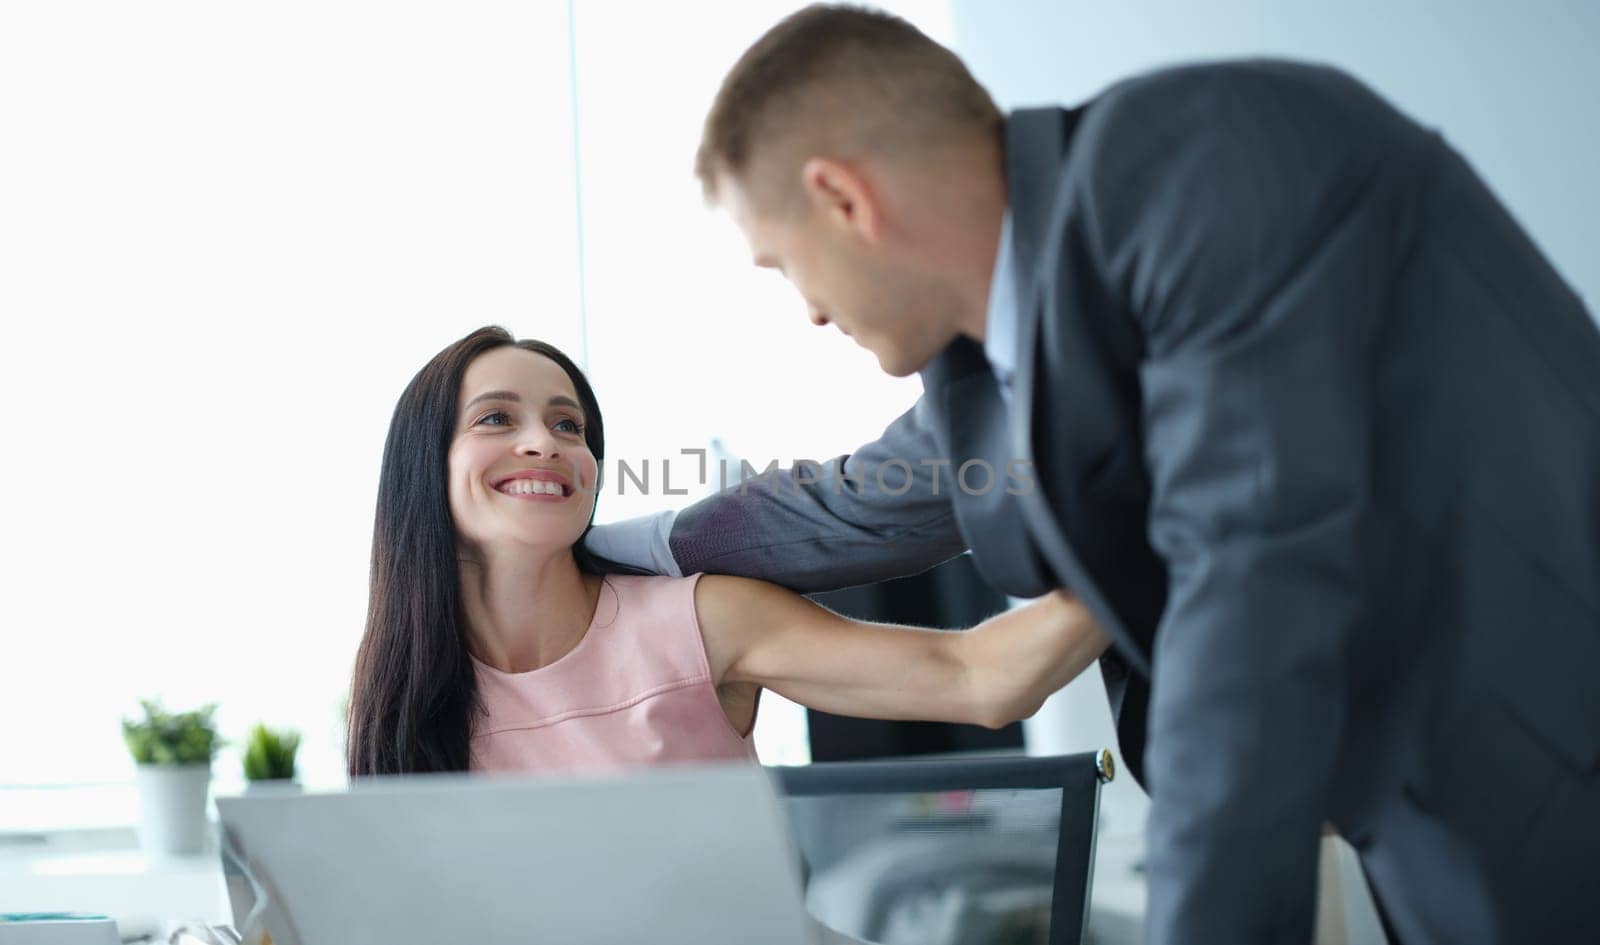 Young man and woman in business suits hugging at work in office. Love affairs at work concept